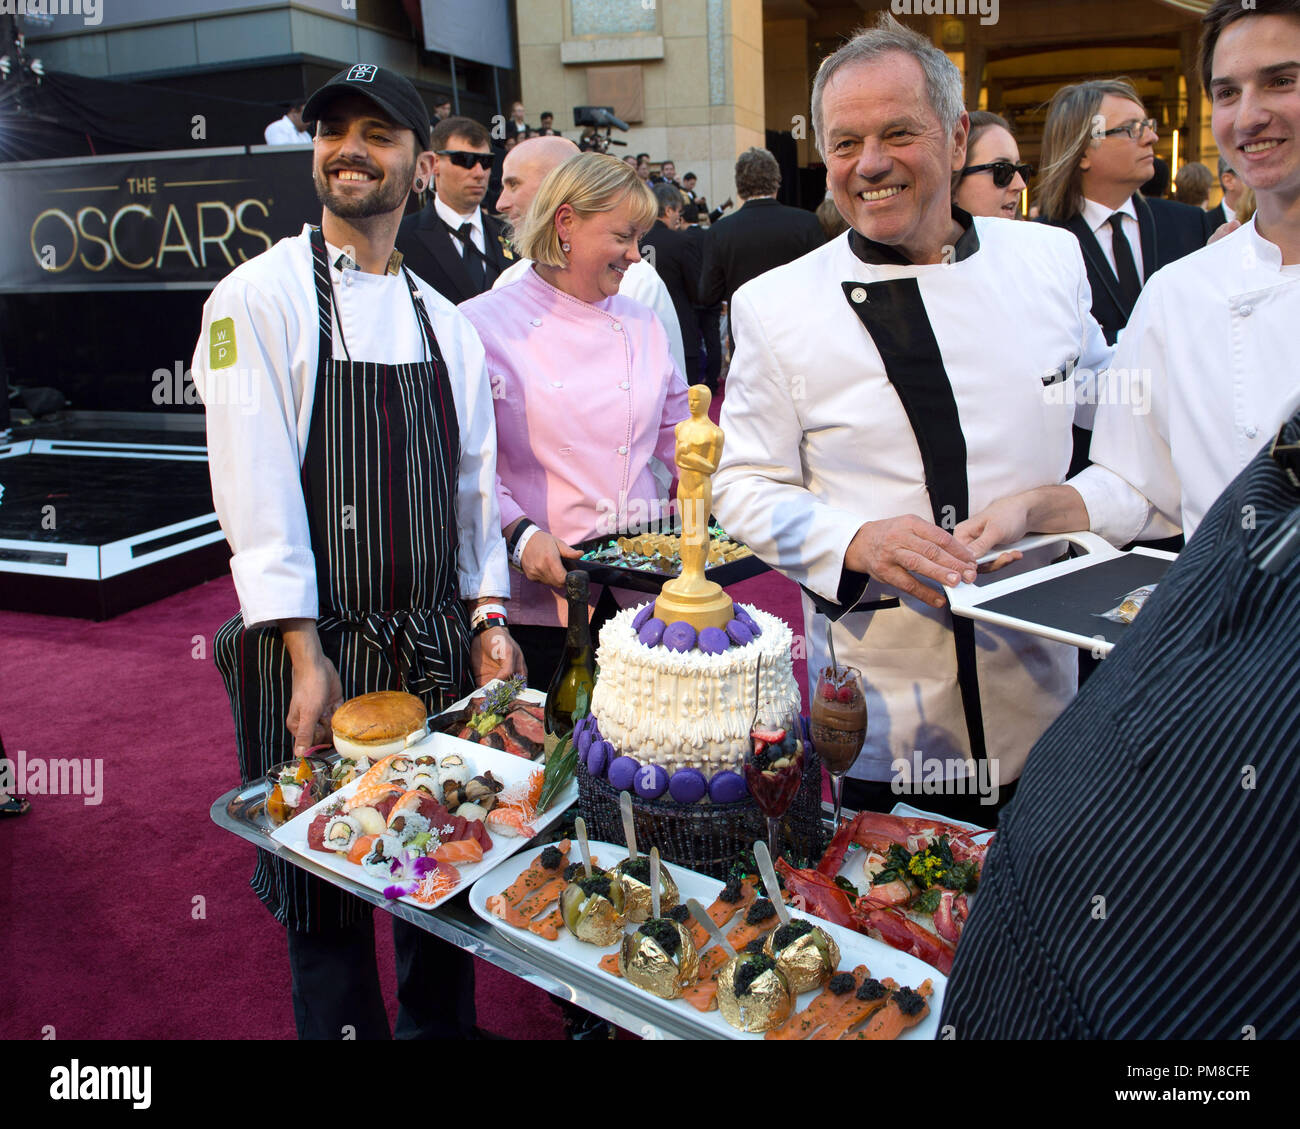 Celebrity Chef Wolfgang Puck arrives for The Oscars® at the Dolby® Theatre in Hollywood, CA February 24, 2013. Stock Photo